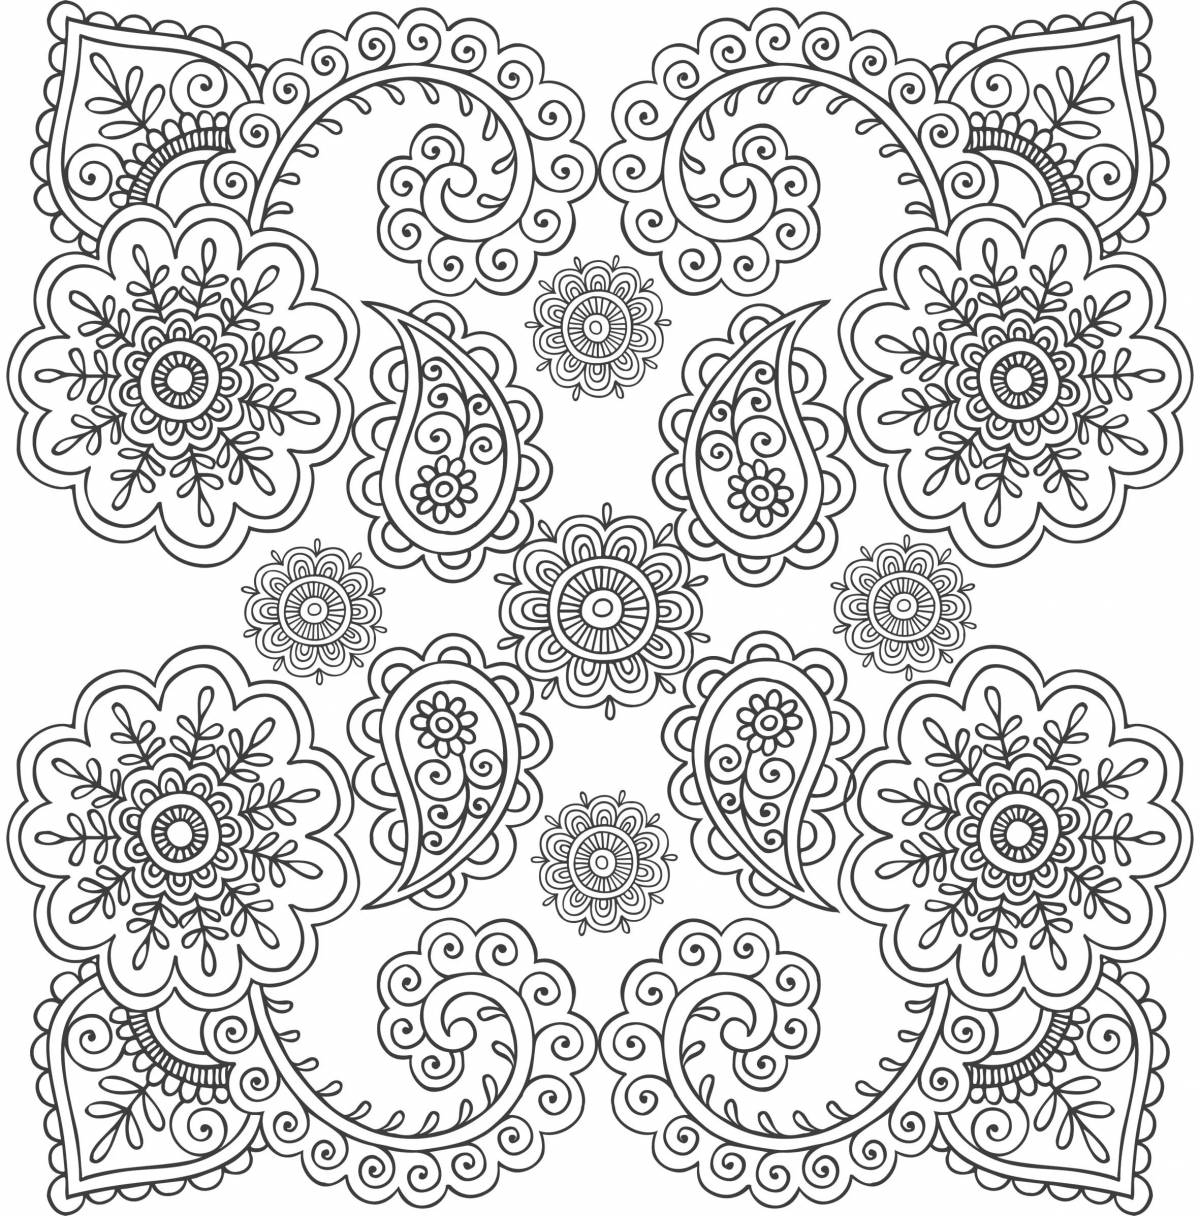 Patterns and ornaments #3